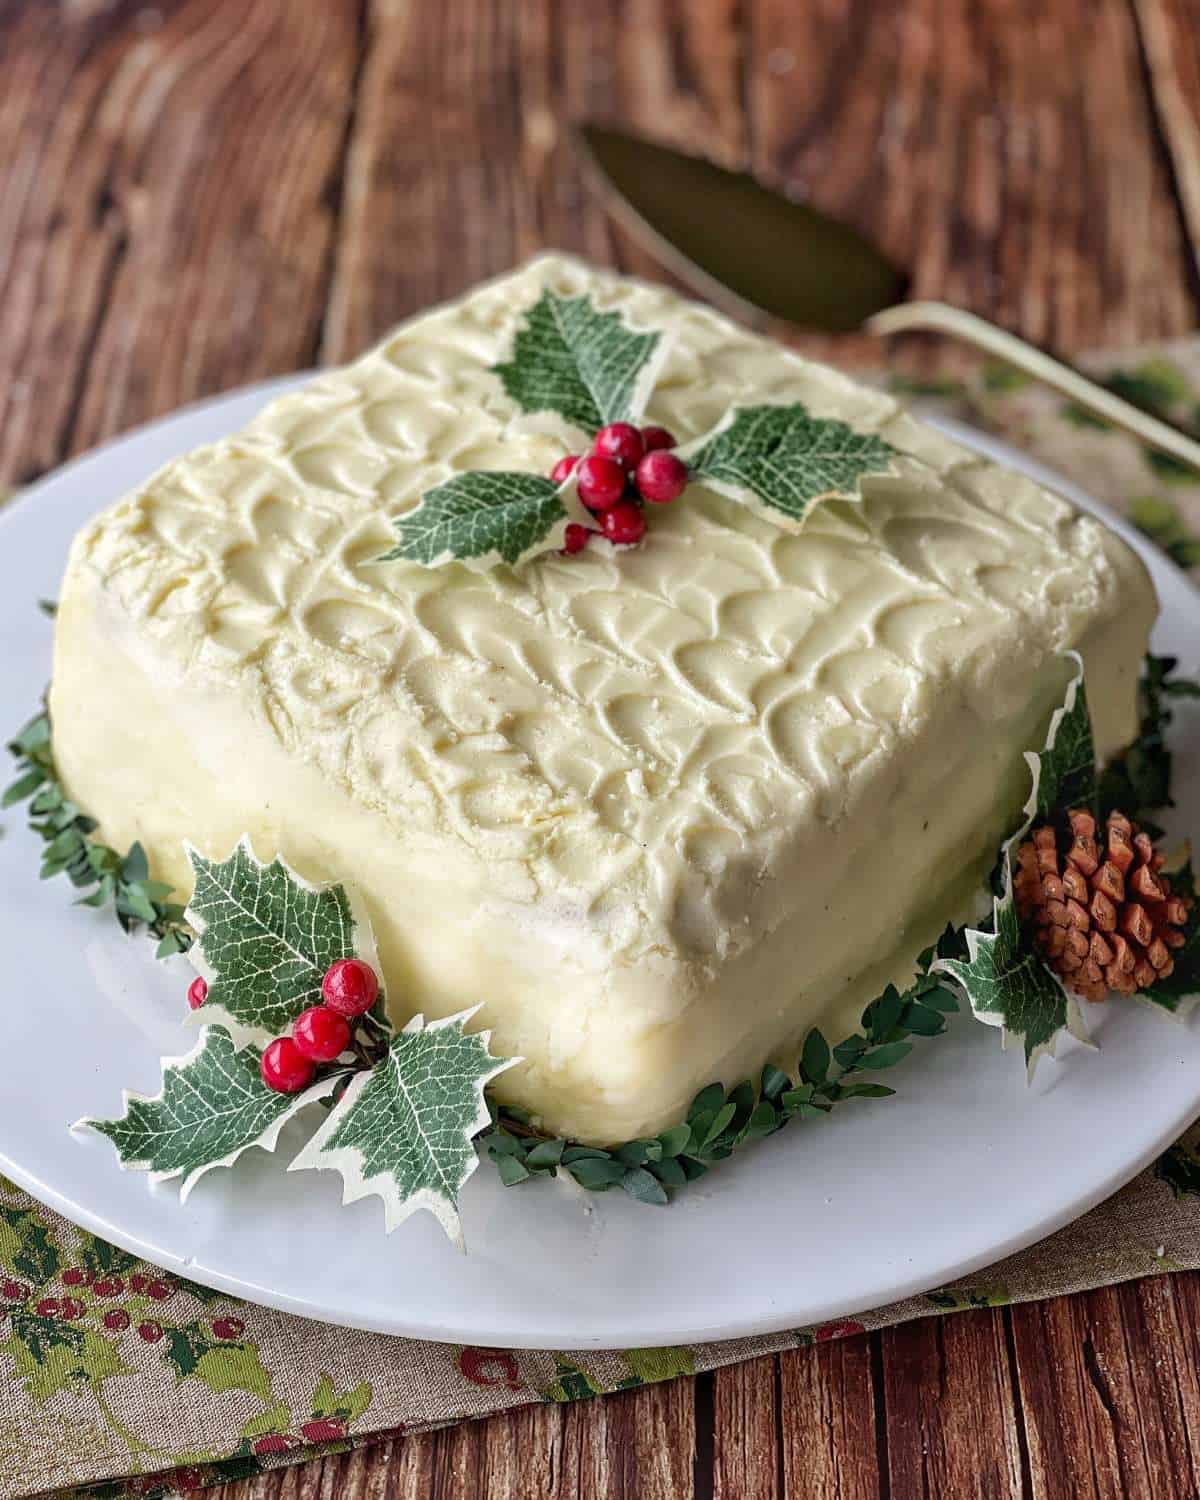 A close up of an iced Christmas cake, decorated with some Christmas mistletoe